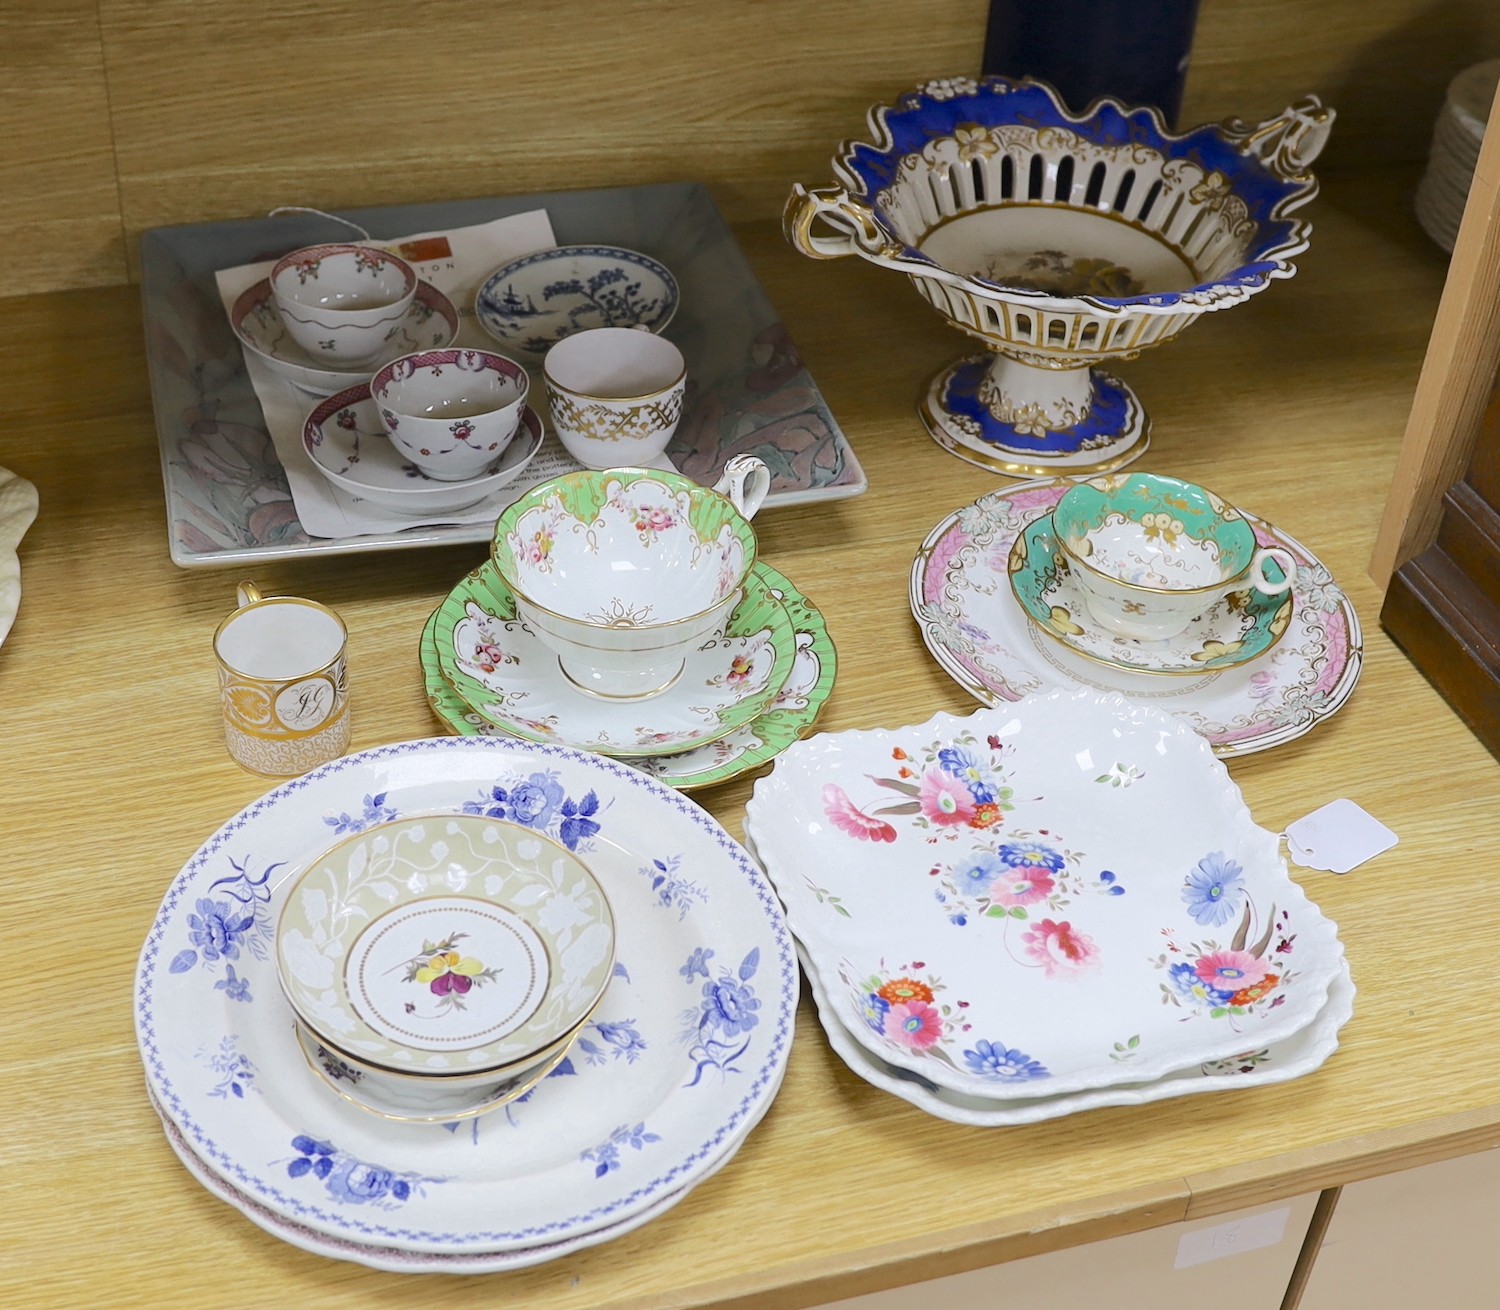 A Worcester Canonball-pattern blue and white saucer, and other 18th and 19th century tableware